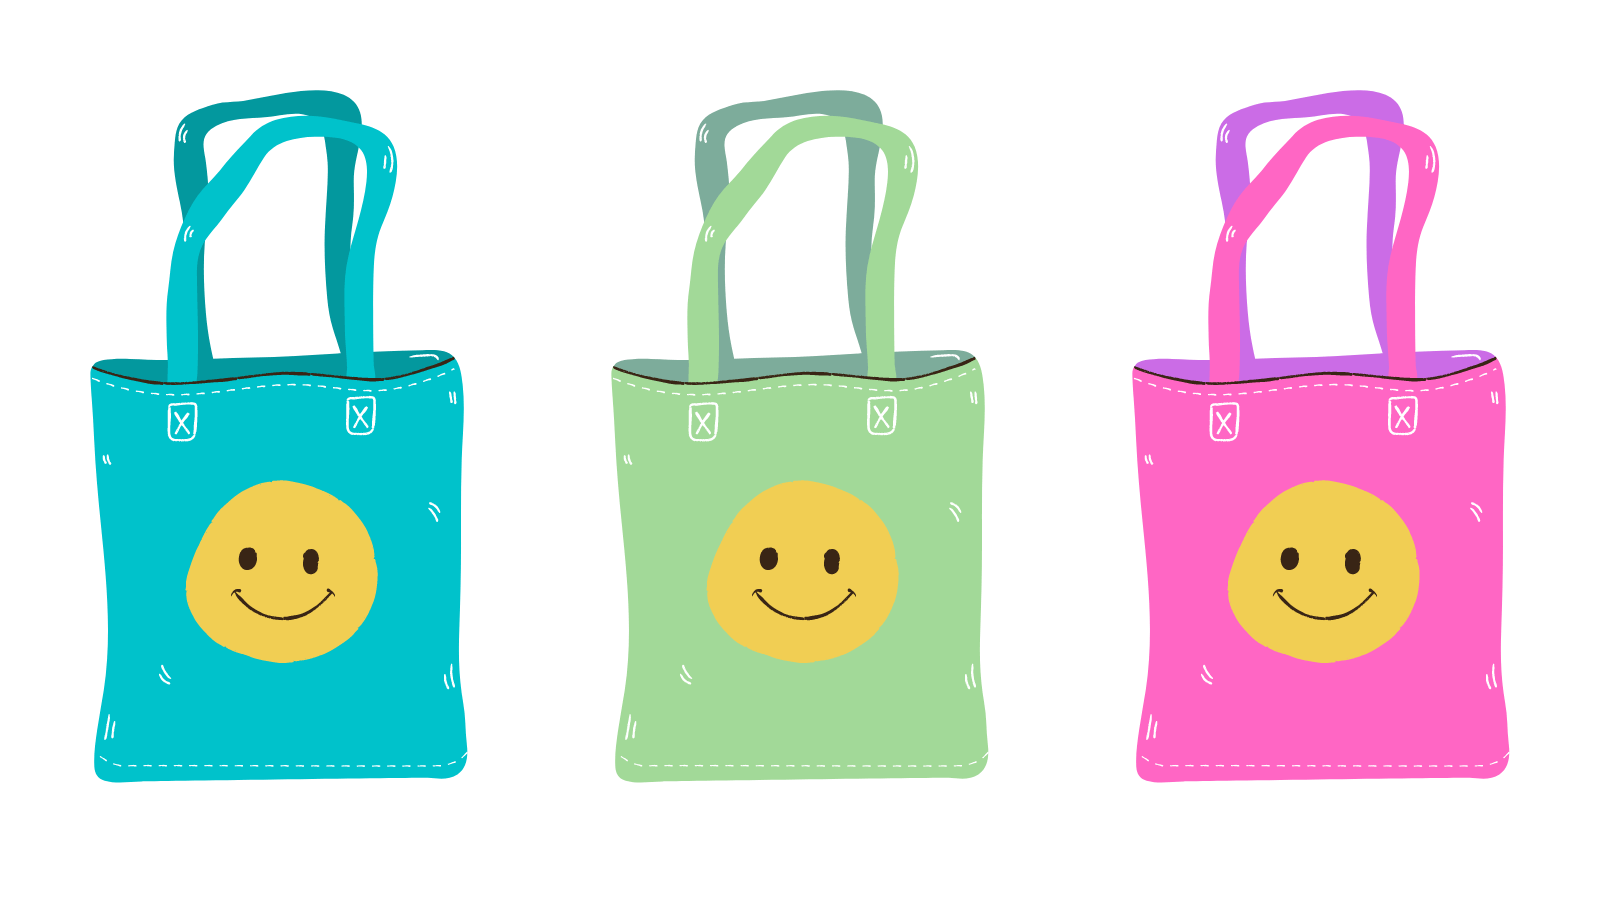 Three tote bags with smiley faces printed on them one turquoise, one light green, and one pink